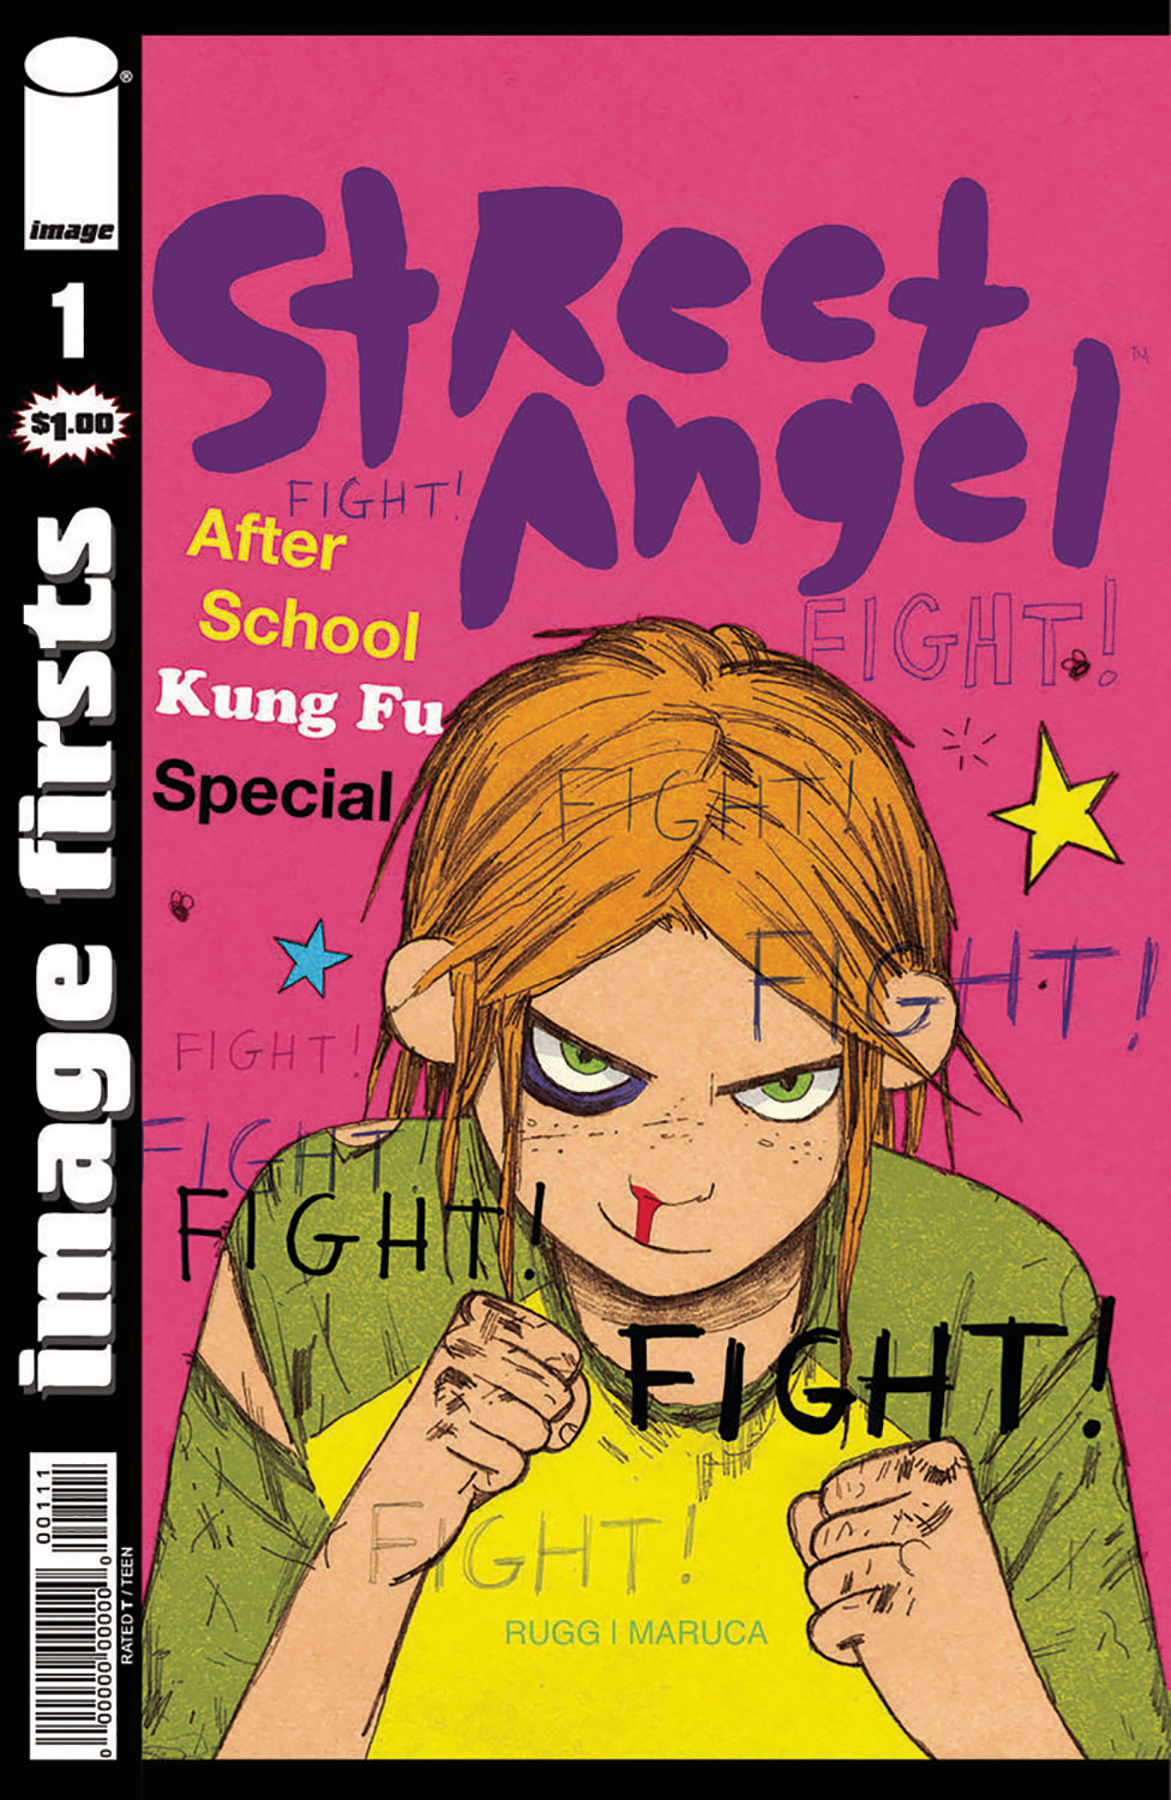 Image Firsts Street Angel #1 Volume 34